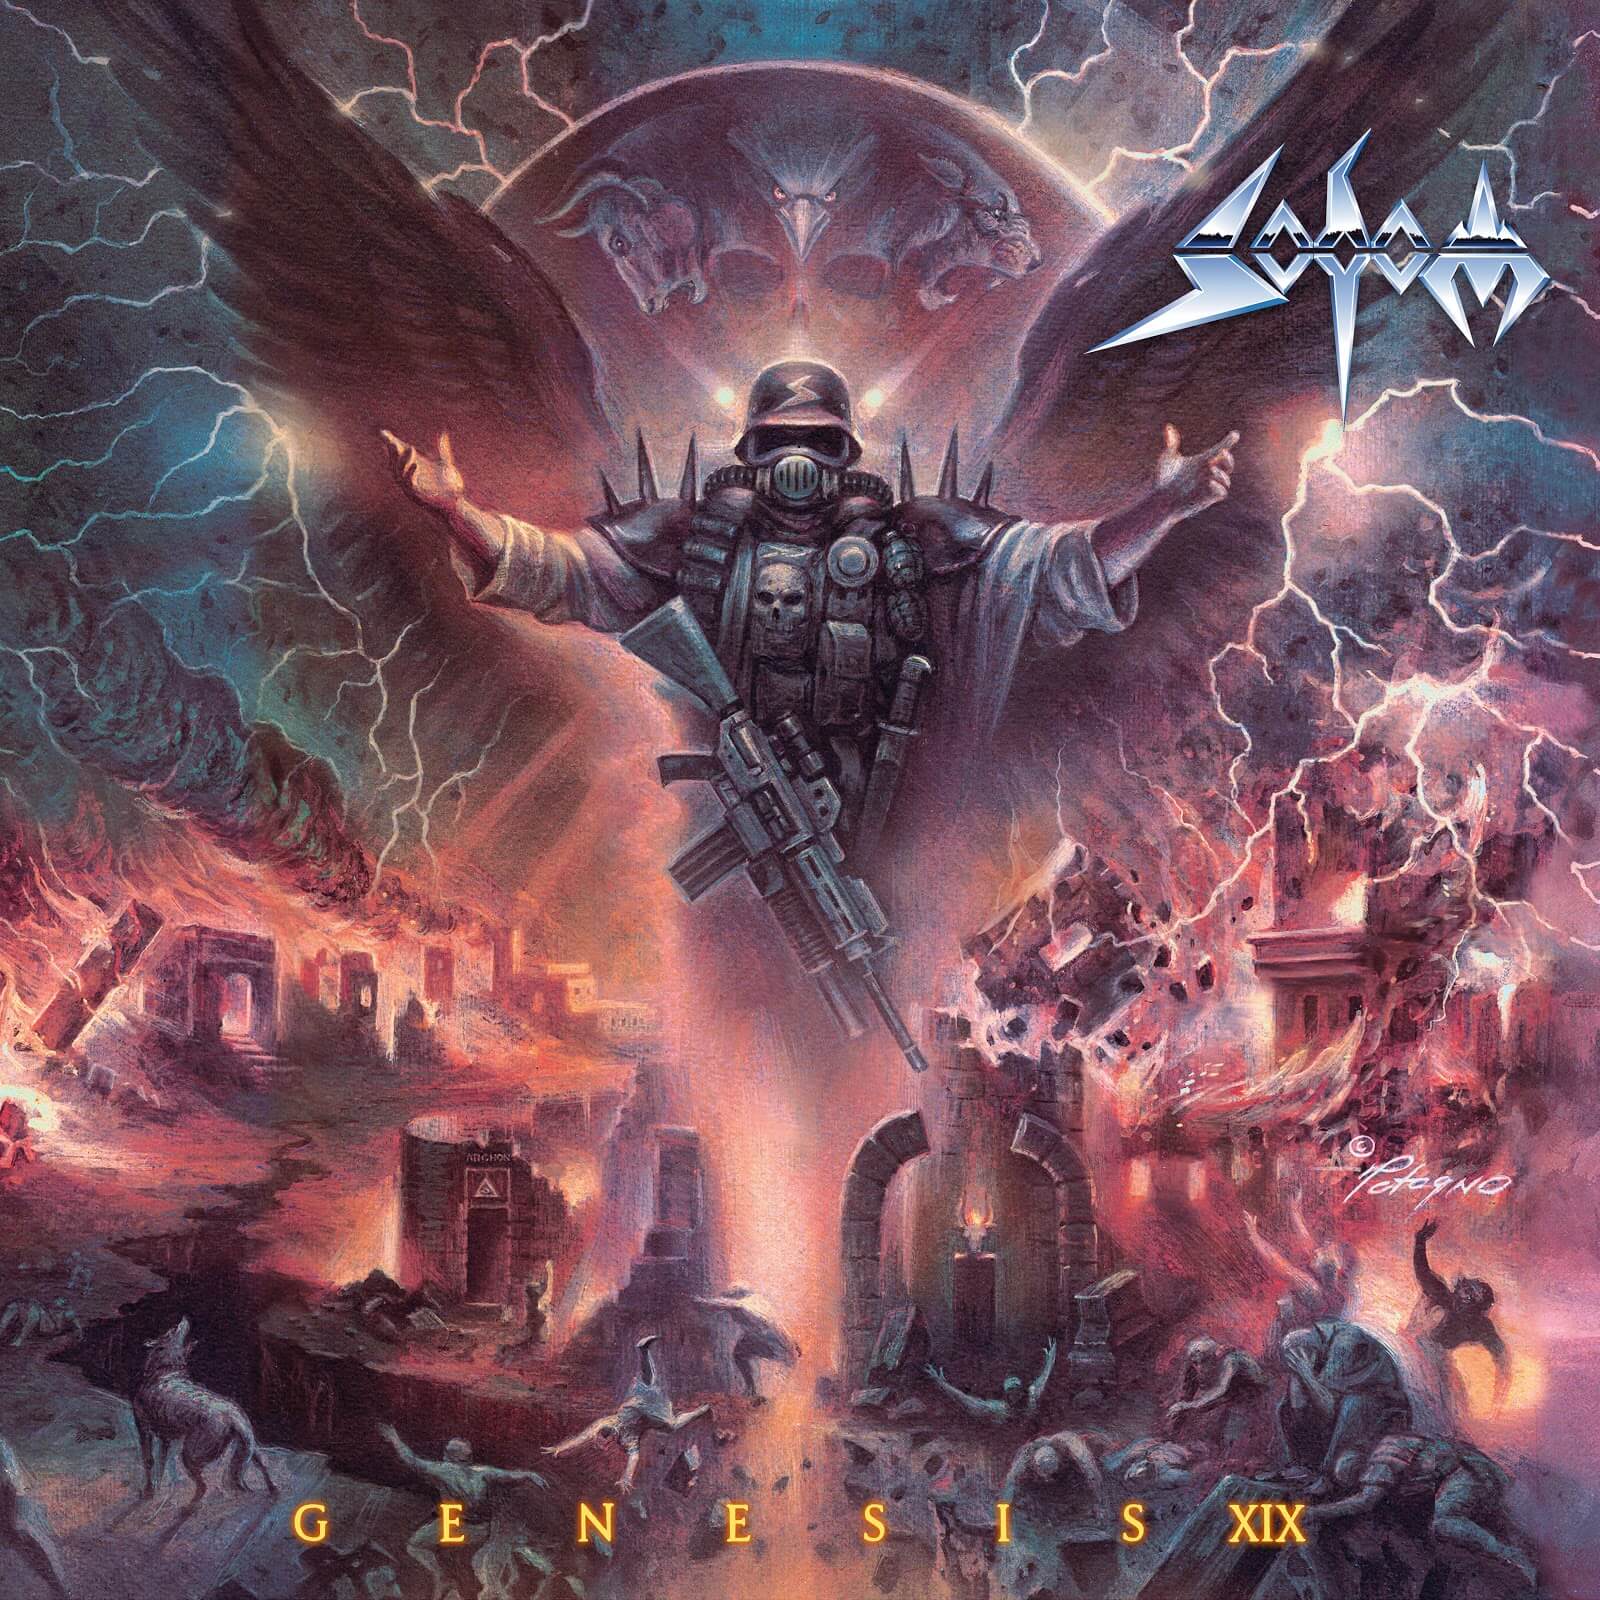 Genesis XIX by Sodom album review by Jahmeel Russell for Northern Transmissions